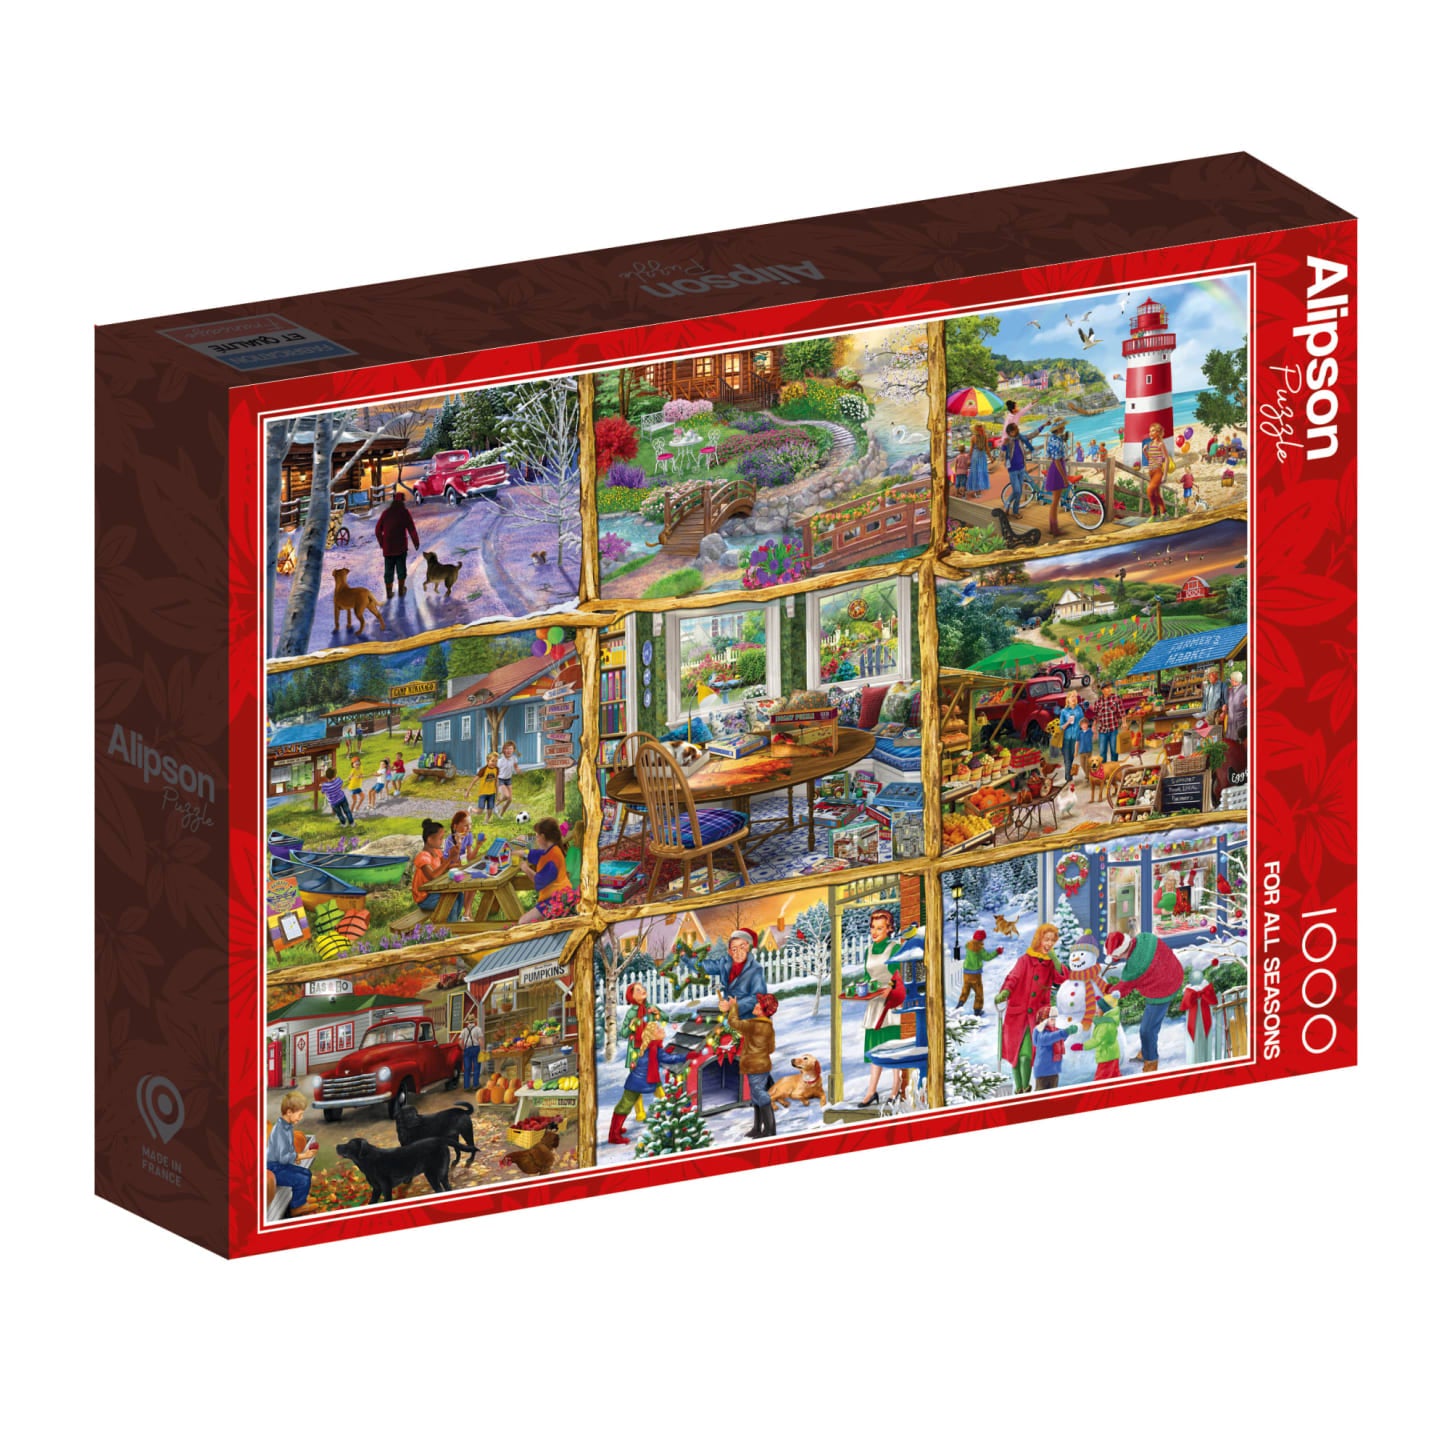 Alipson Puzzle 1000 Palan Palapeli For All Seasons